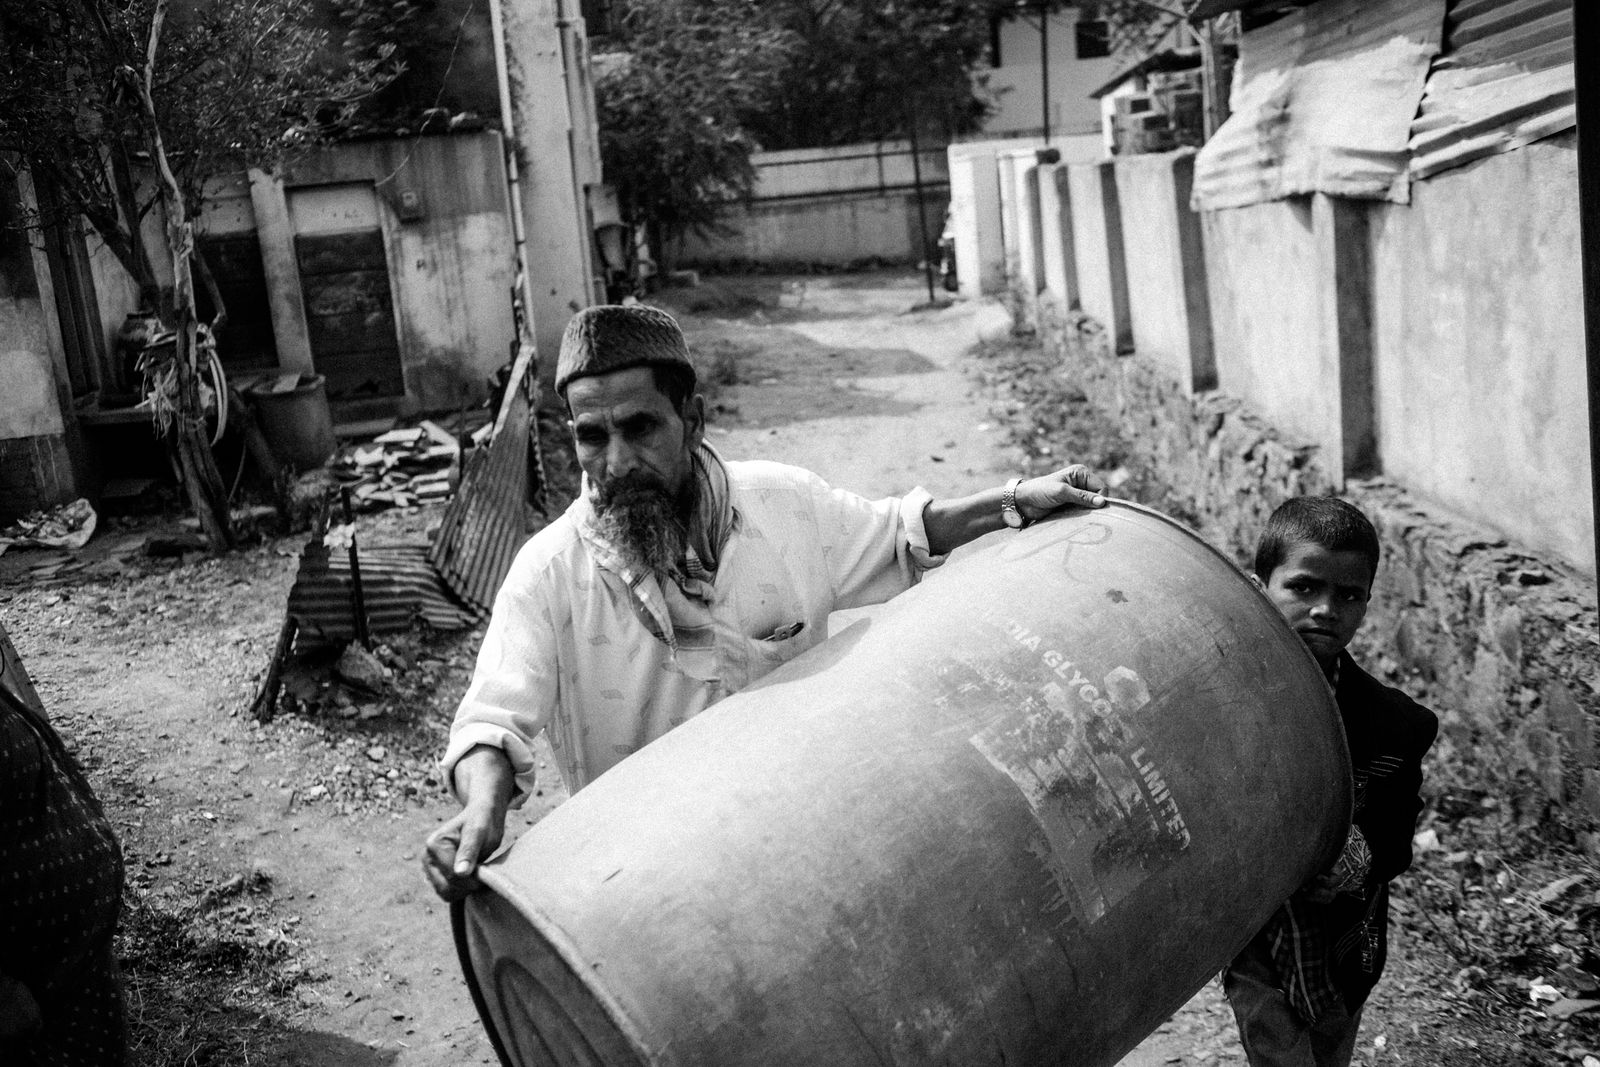 © Harsha Vadlamani - A man carries a water drum to the tanker in Latur city, Maharashtra. March 27, 2016.